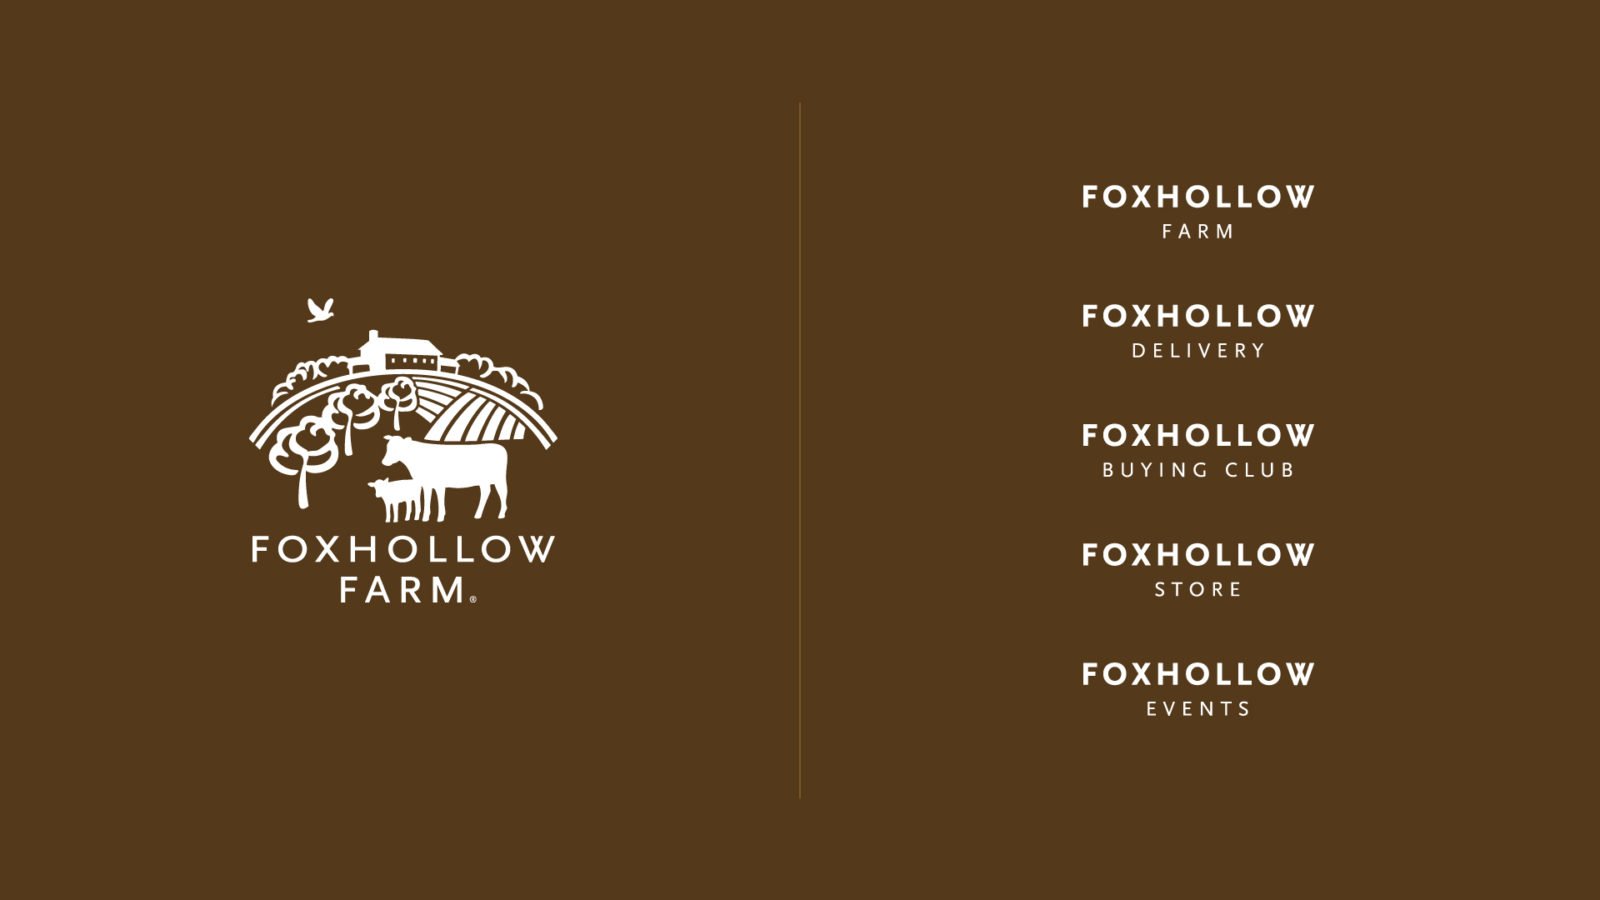 An Identity for Foxhollow Farm Delivery By Bullhorn Creative